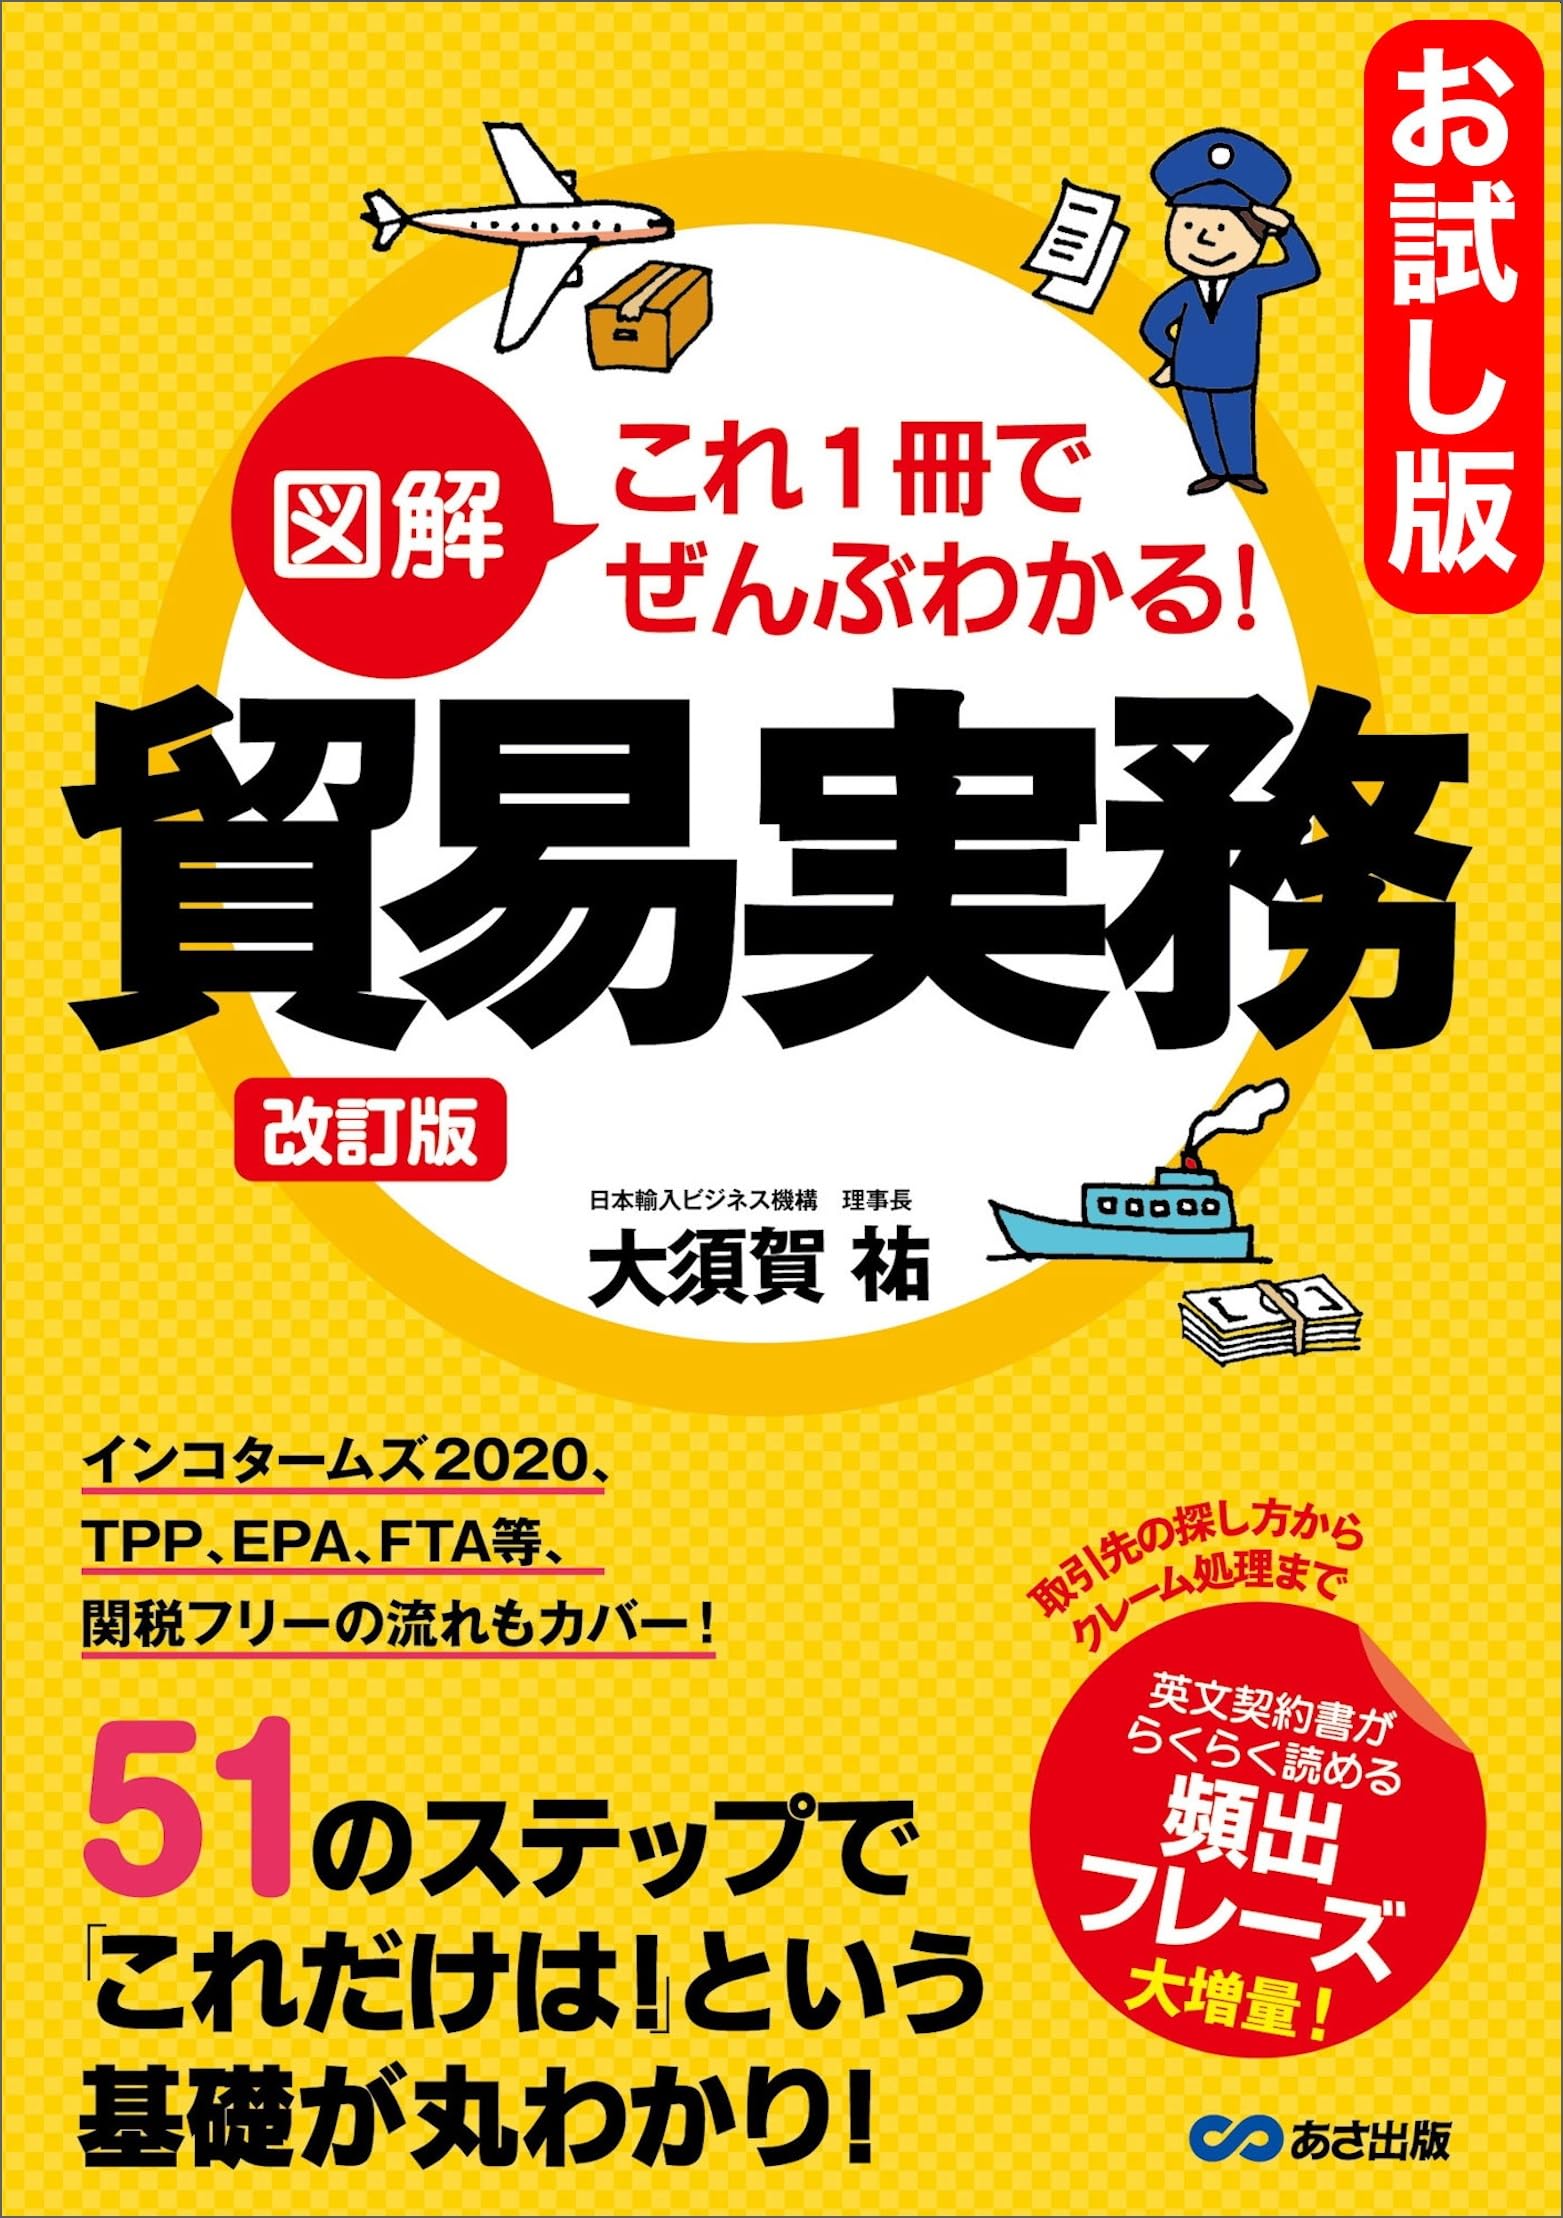 The revised edition of the book illustrated Trade Practice The Basics of Trade This Is All You Need to Know (Japanese Edition)